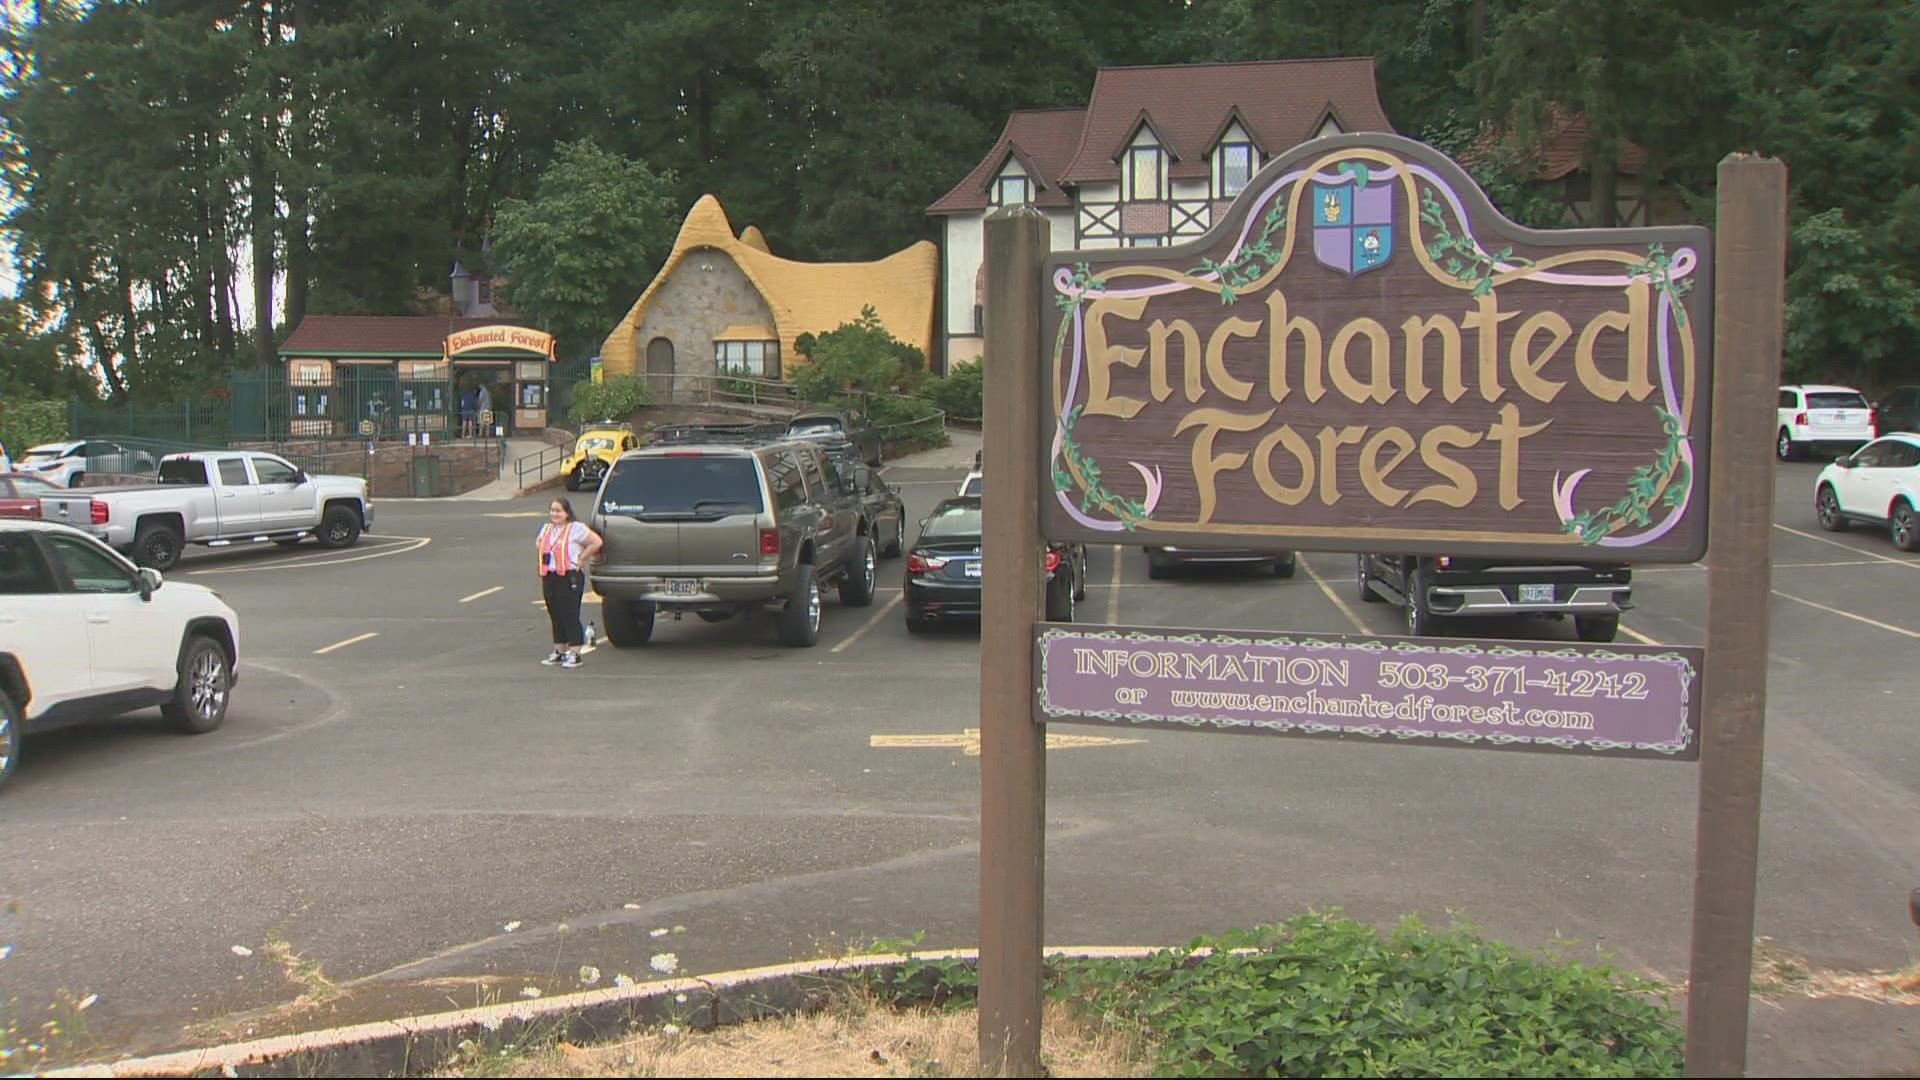 Oregon's Enchanted Forest, a family-owned theme park in the forest outside Salem, has seen ups and downs but lives to celebrate its 50th anniversary.